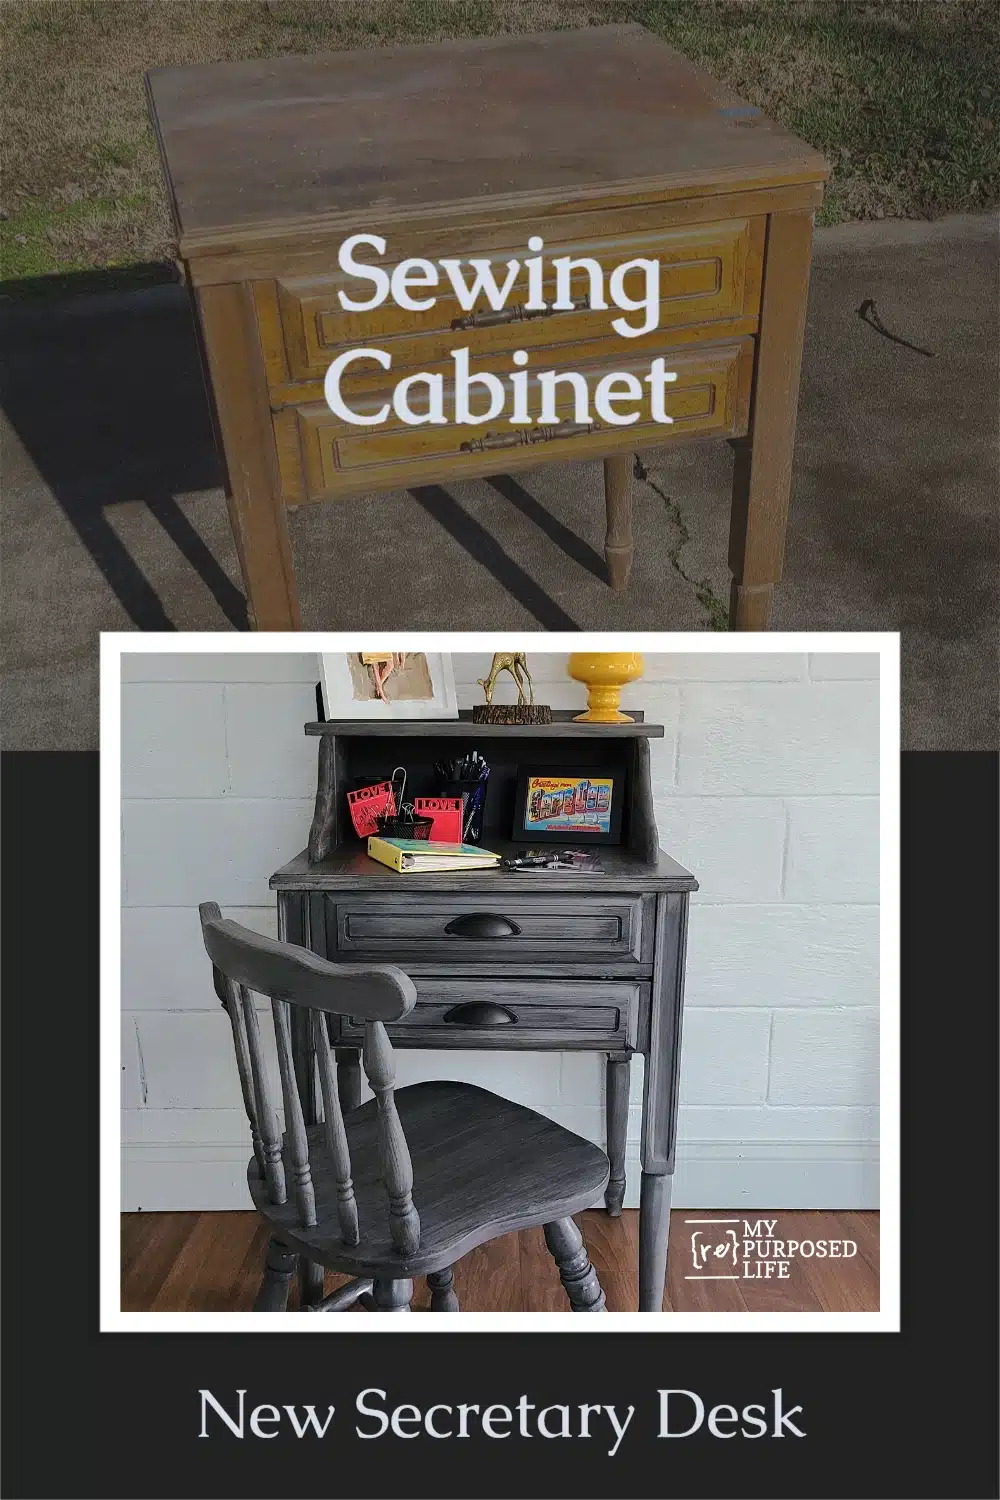 Step by step directions on how to make a secretary desk from an unwanted sewing cabinet. Perfect for laptop, or bill paying center. Tips for building and painting. #MyRepurposedLife #repurposed #upcycle #sewingcabinet #secretary via @repurposedlife  via @repurposedlife